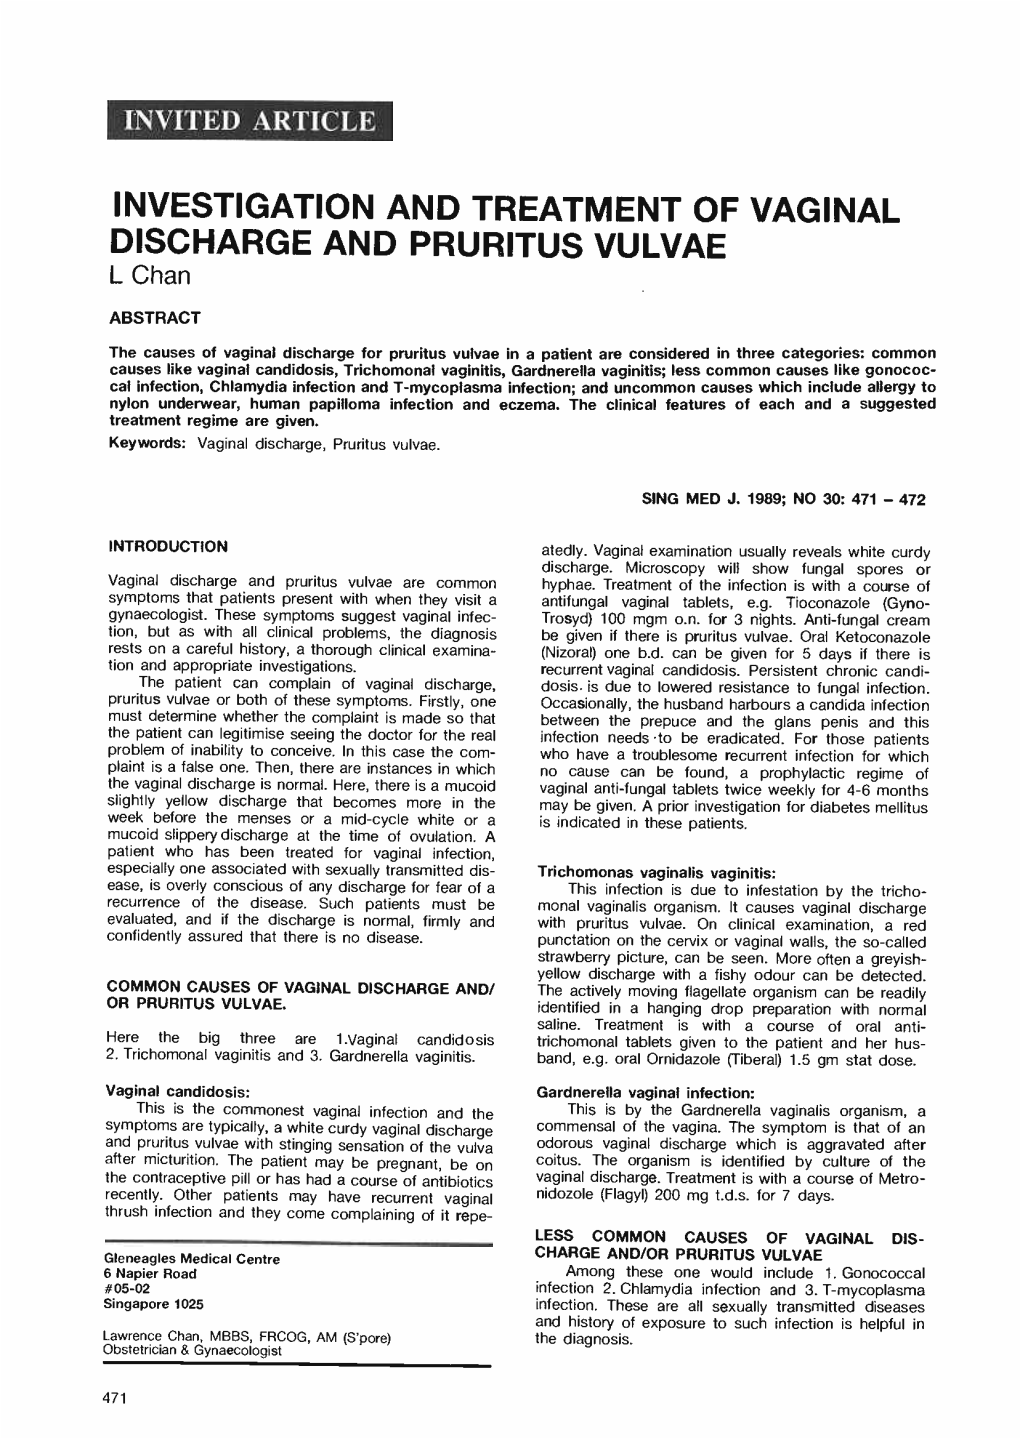 INVESTIGATION and TREATMENT of VAGINAL DISCHARGE and PRURITUS VULVAE L Chan